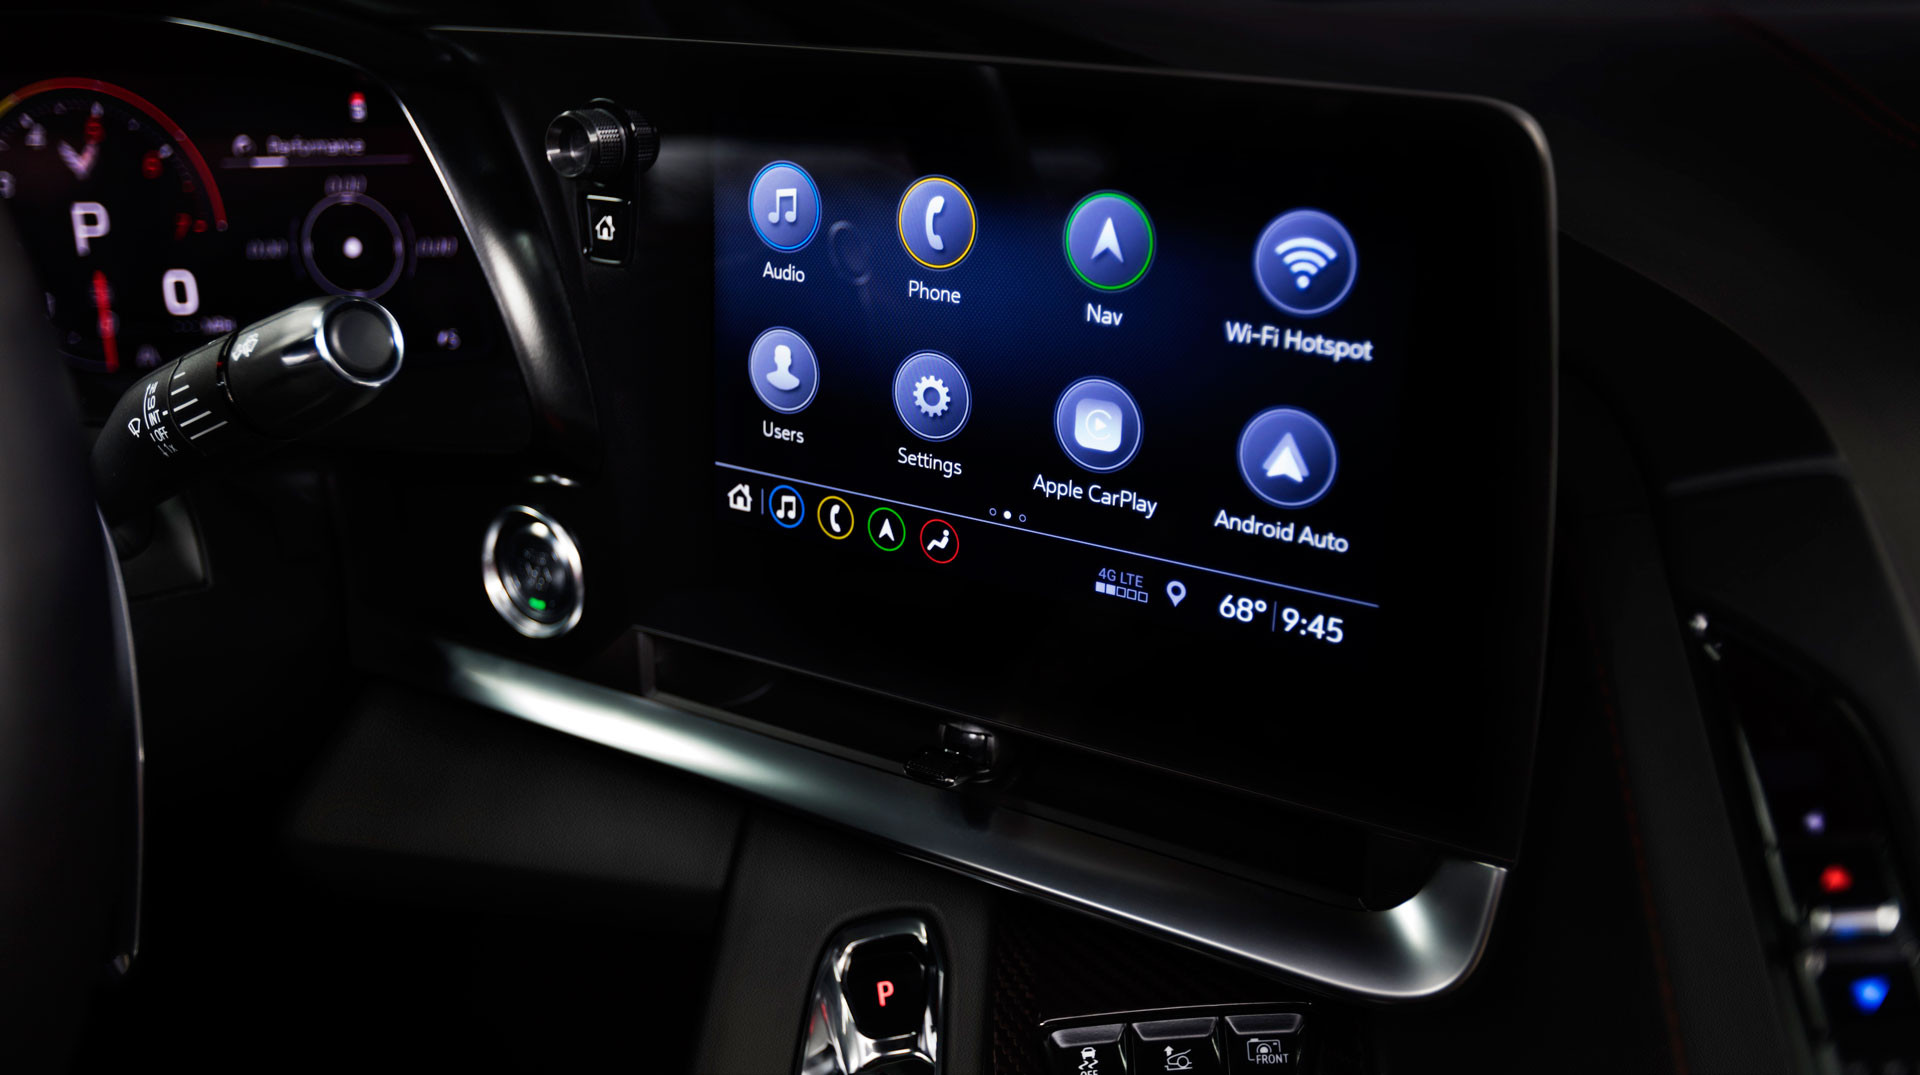 2020 Chevy Corvette with Android Auto